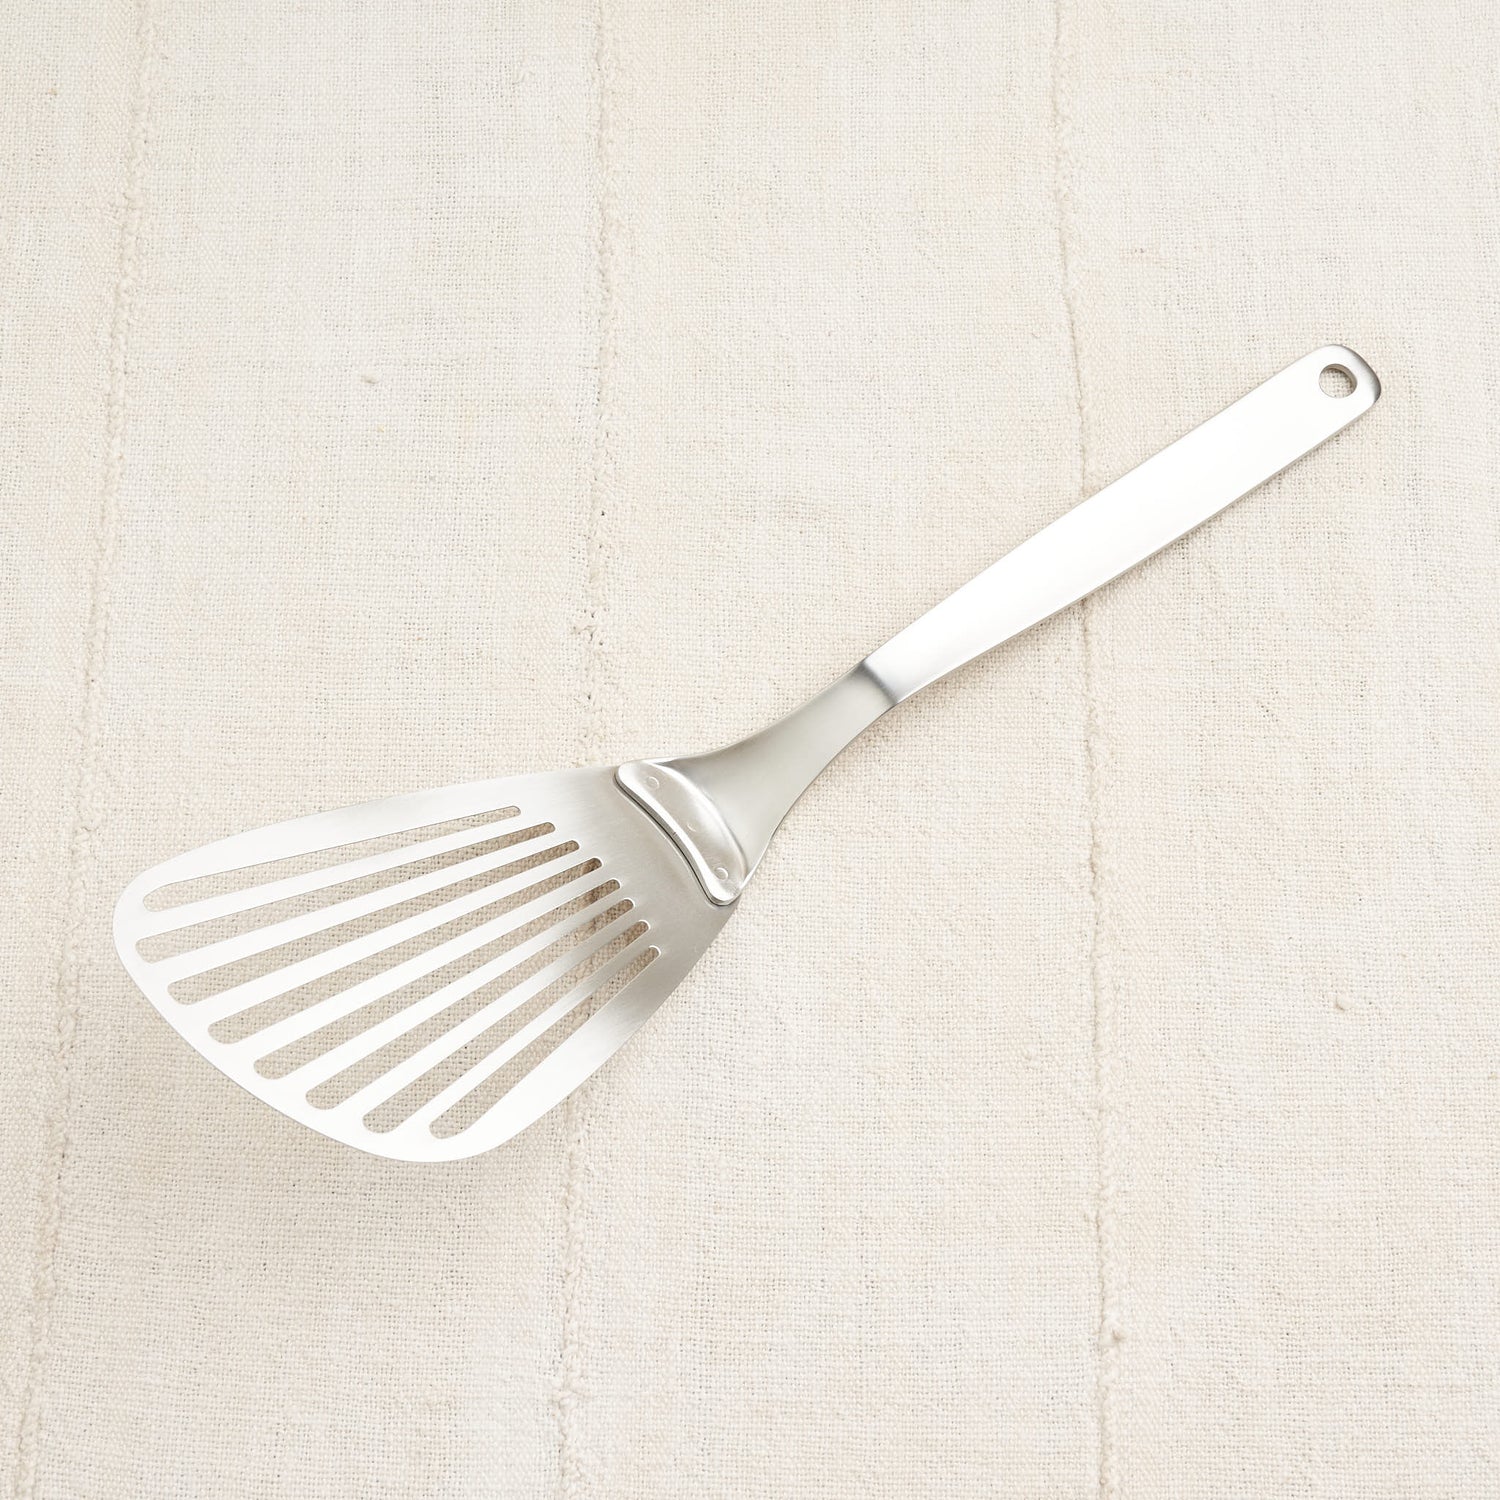 Authentic Household Stainless Steel Spatula With Wood Handle Made in Japan  / Vintage Spatula Flipper 